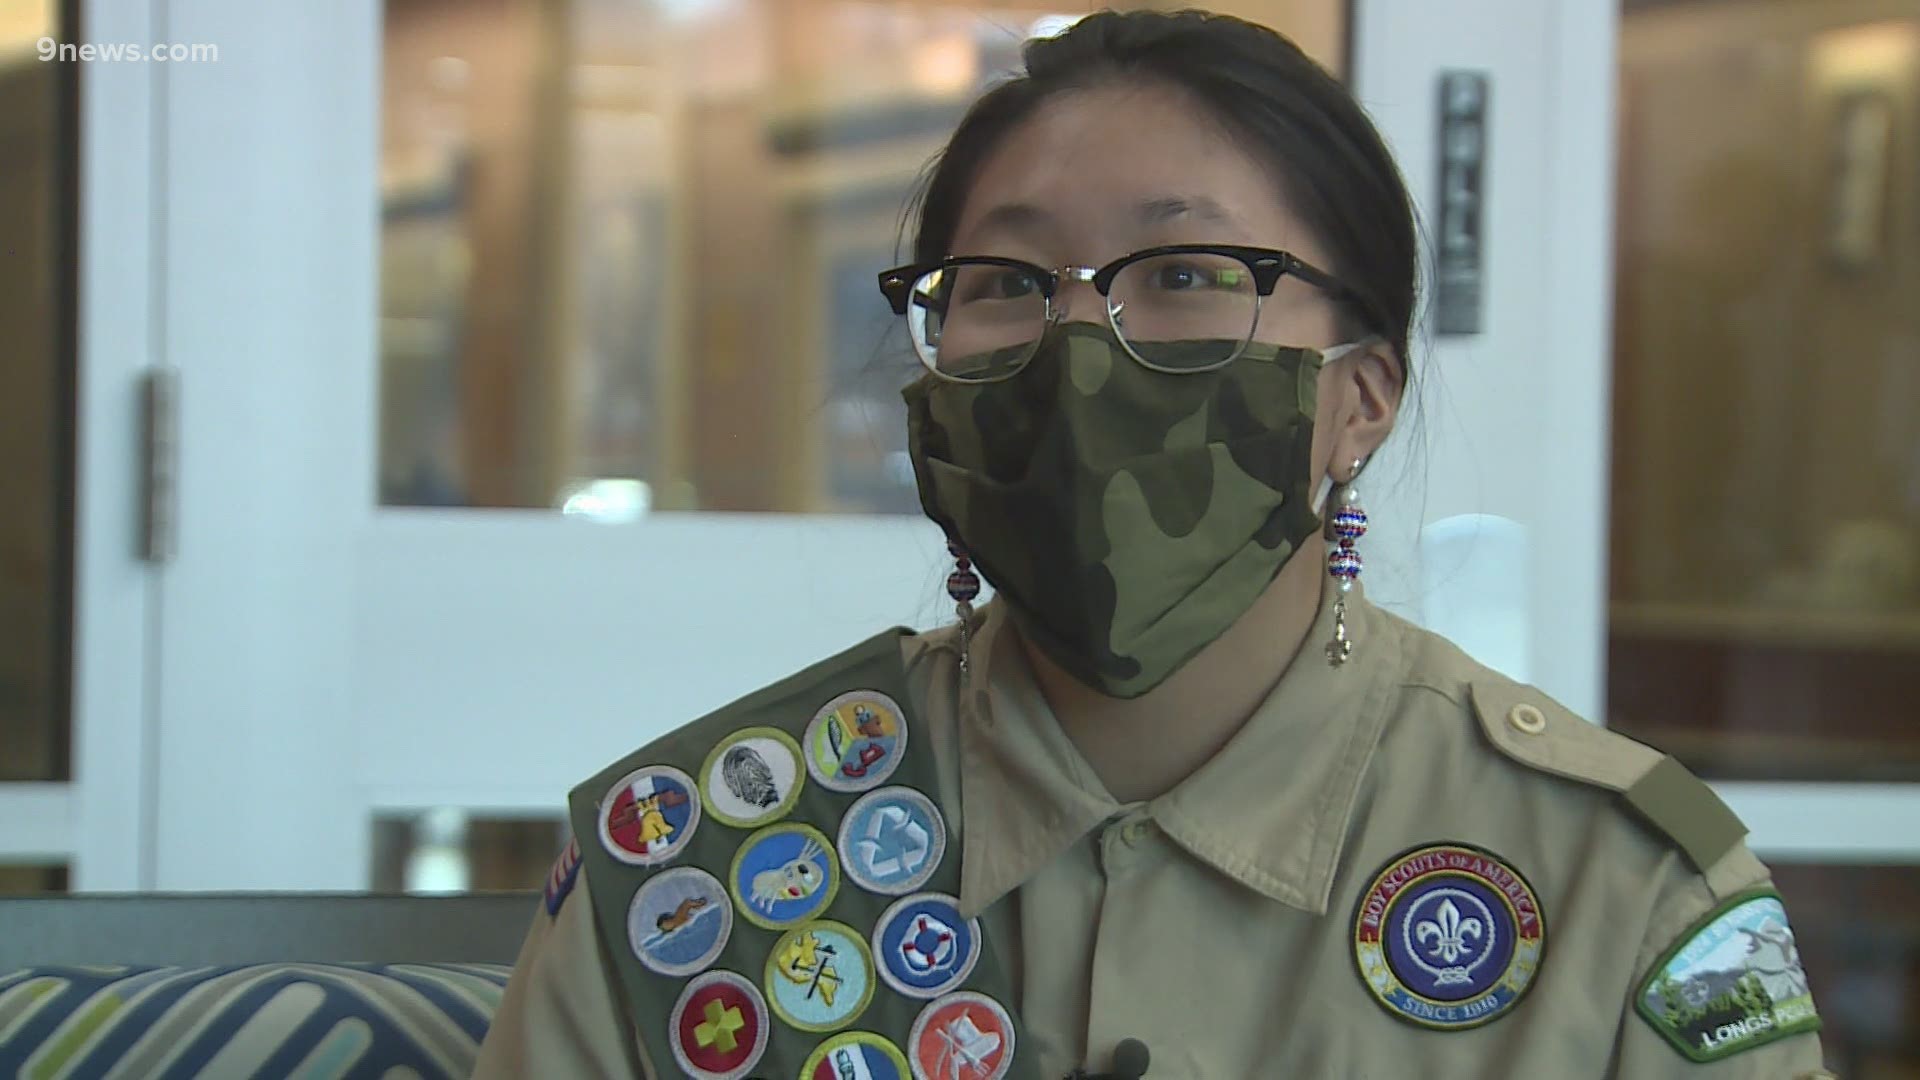 Now Colorado has its first class of female Eagle Scouts.